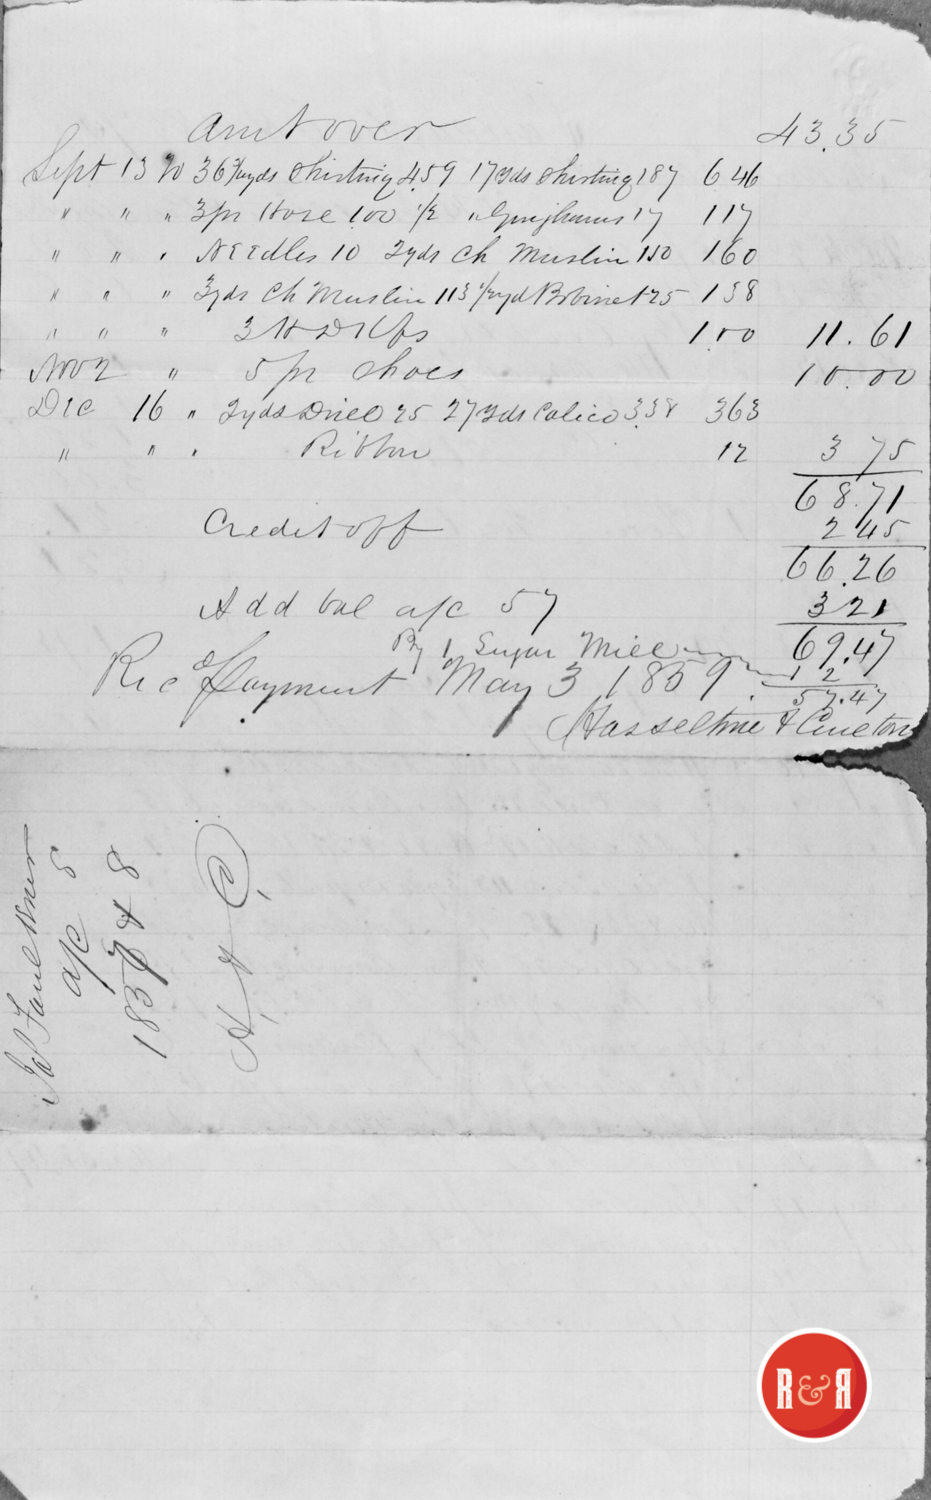 LEDGER FROM HASSELTINE AND CURETON - 1859, p. 2